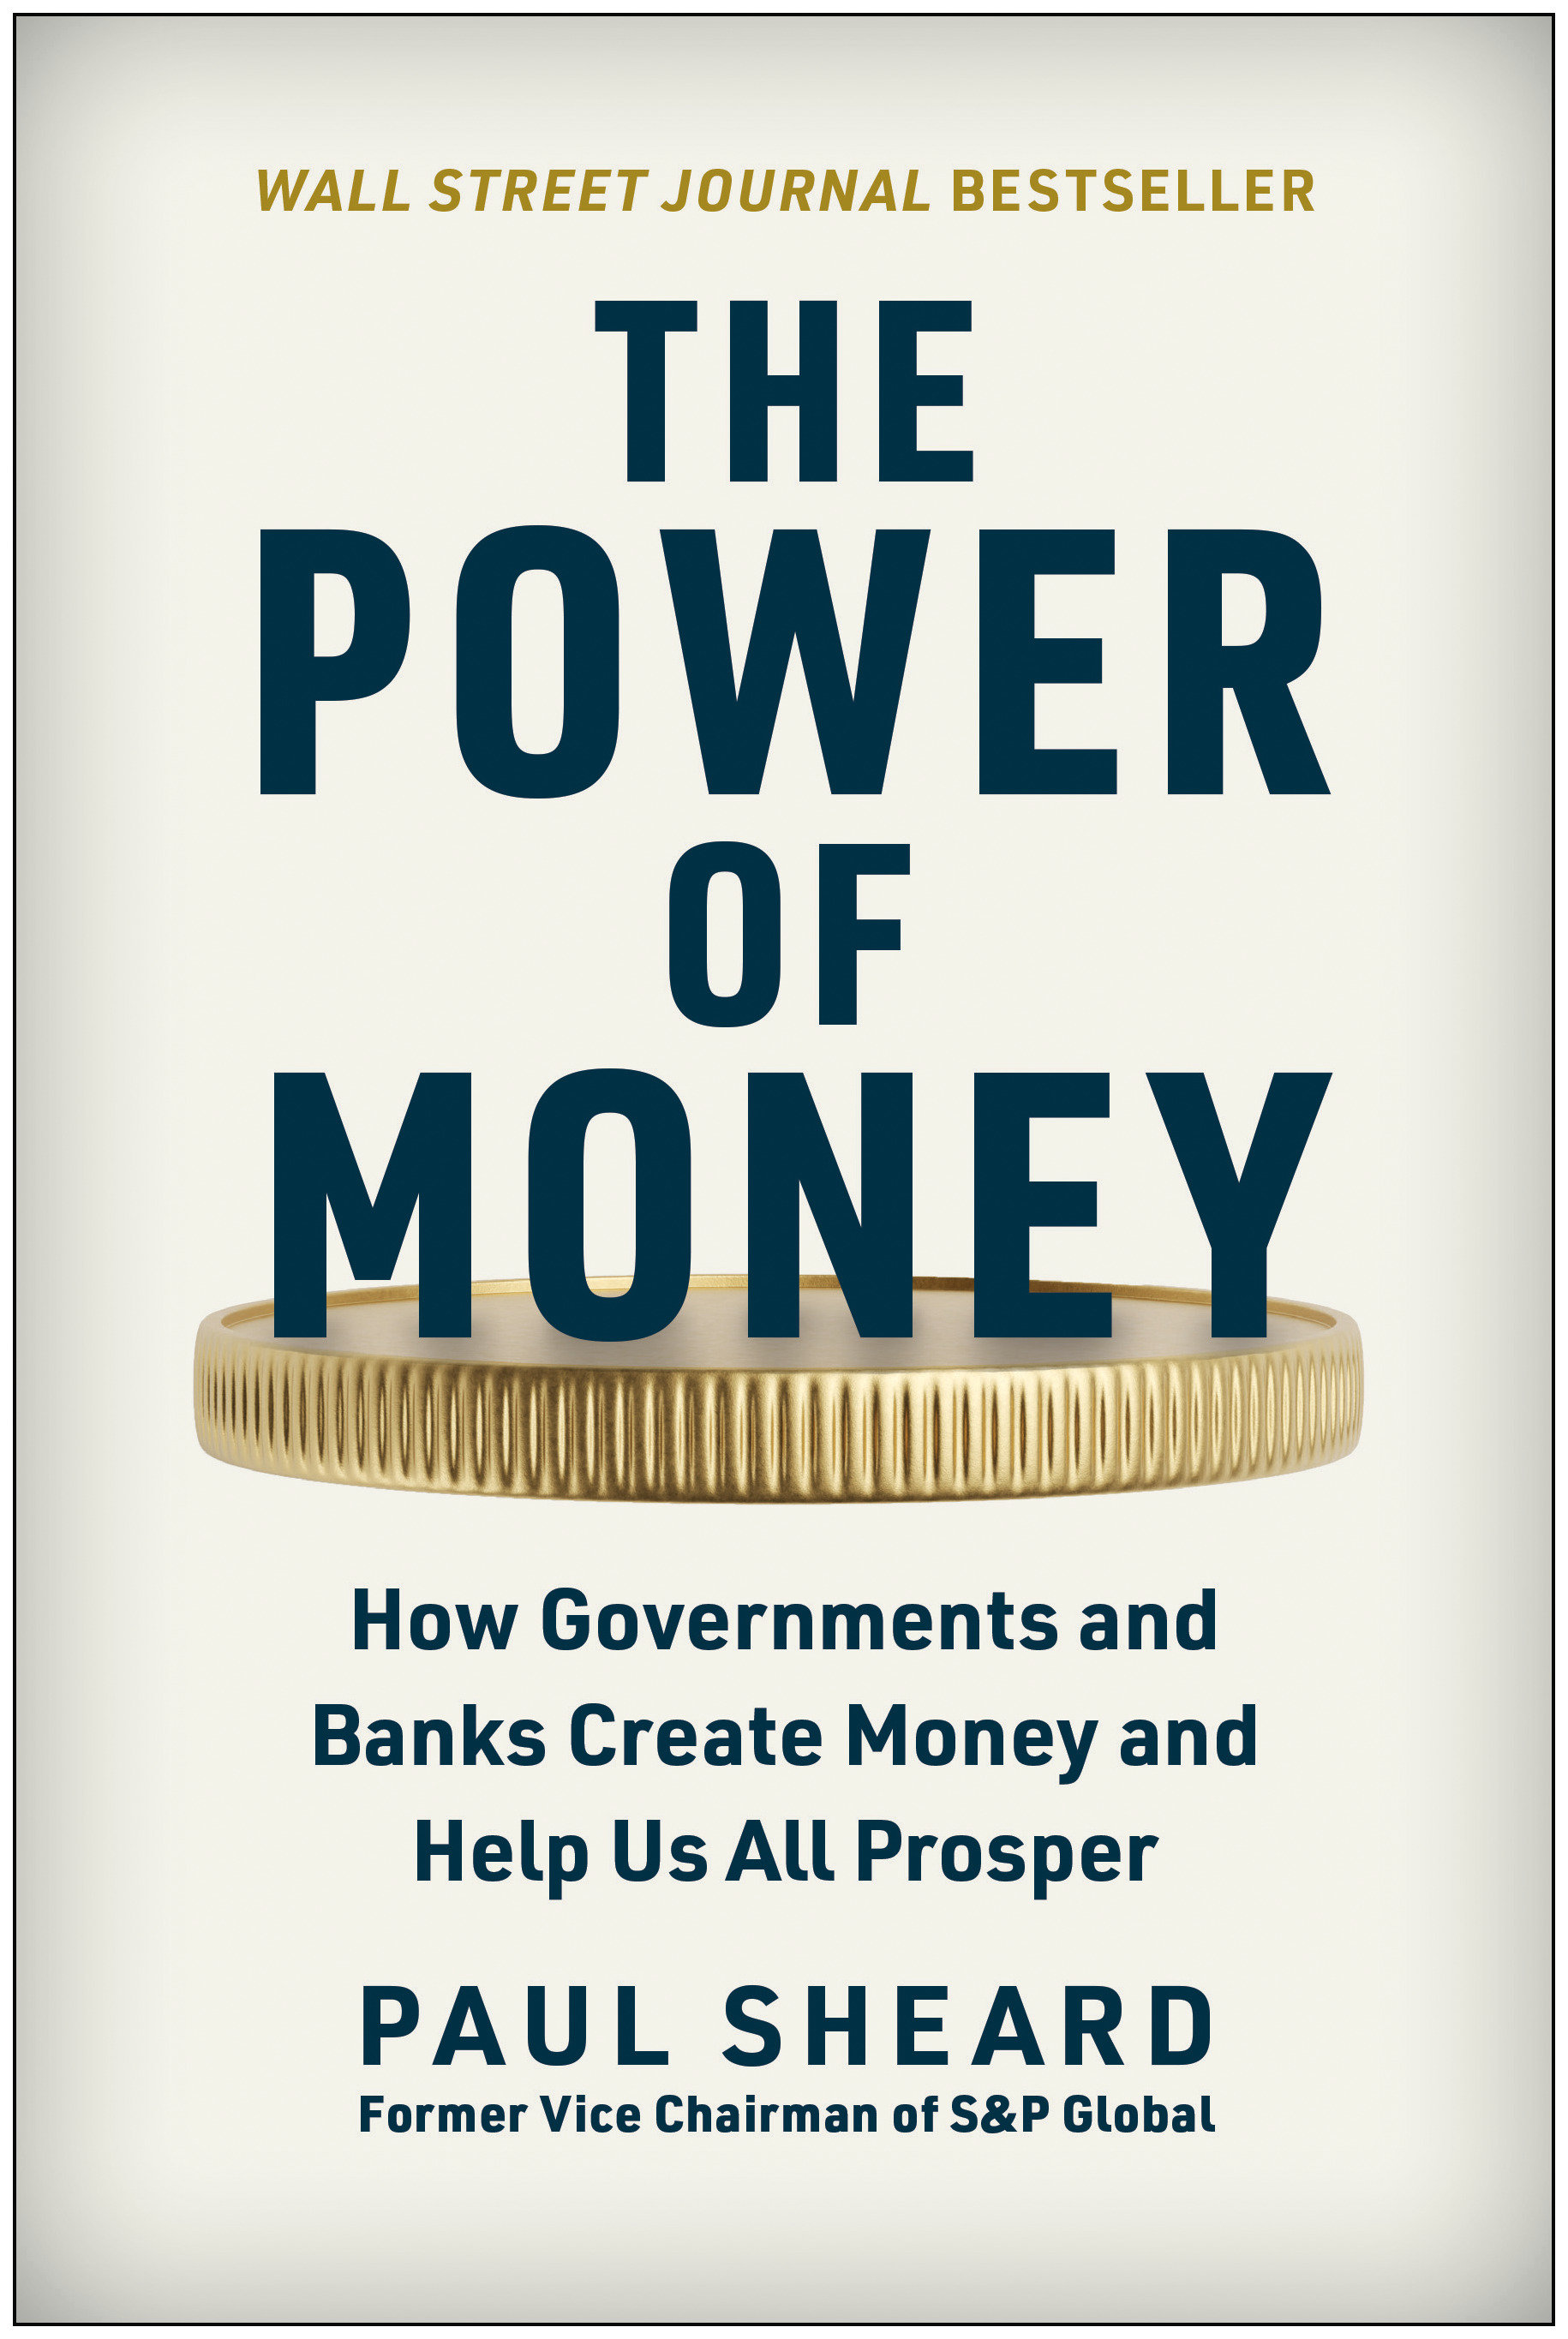 The Power Of Money (Hardcover Book)